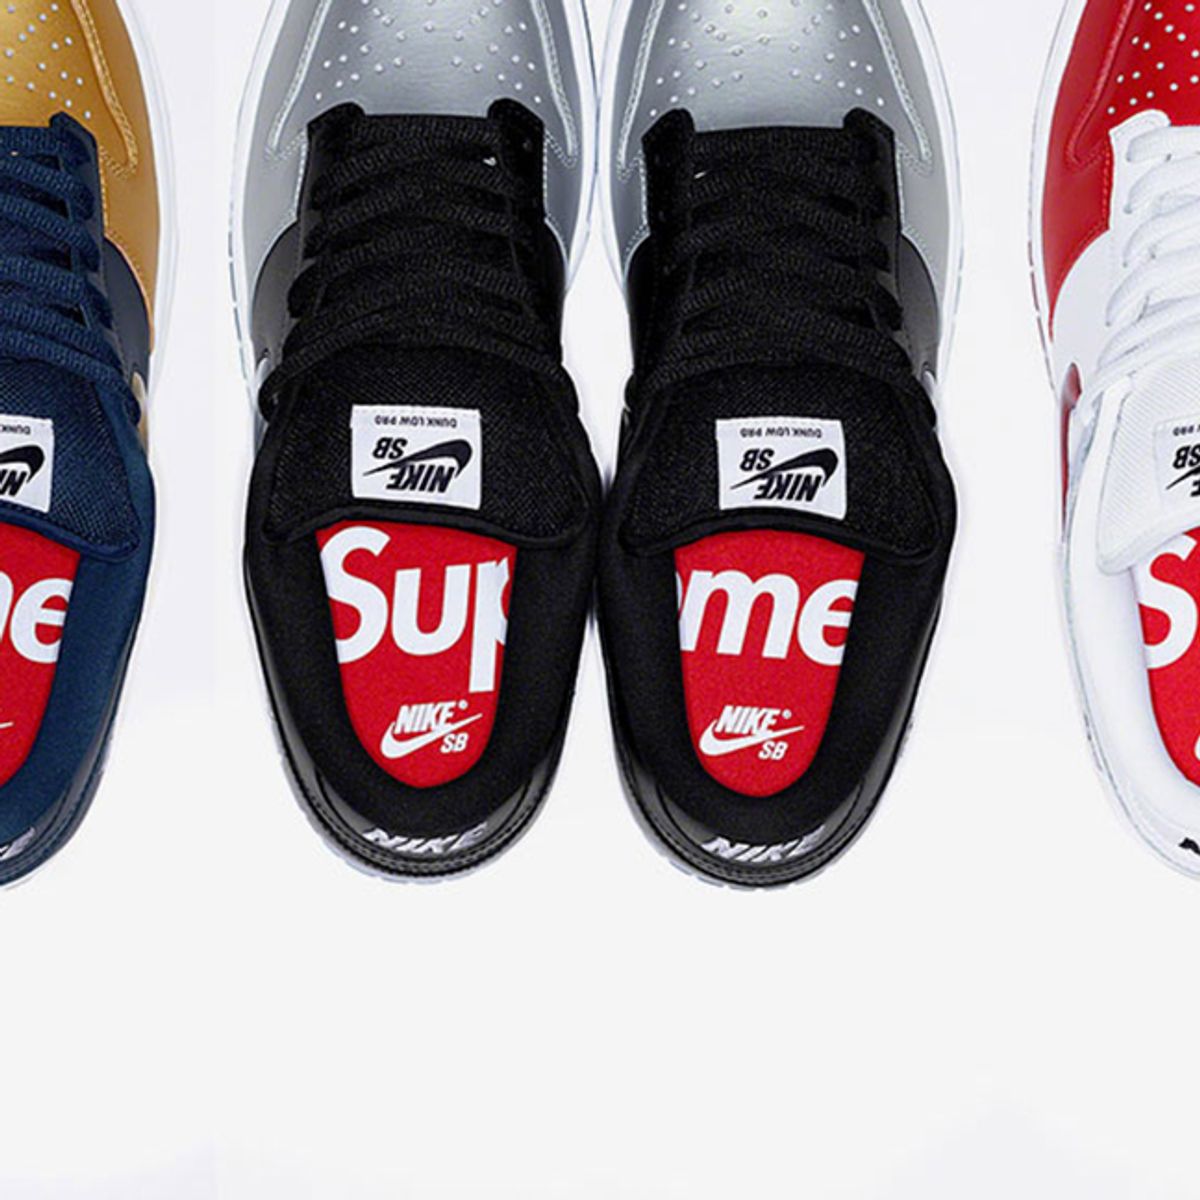 Collaborations are what made Supreme sale worth $2.1 billion to VF